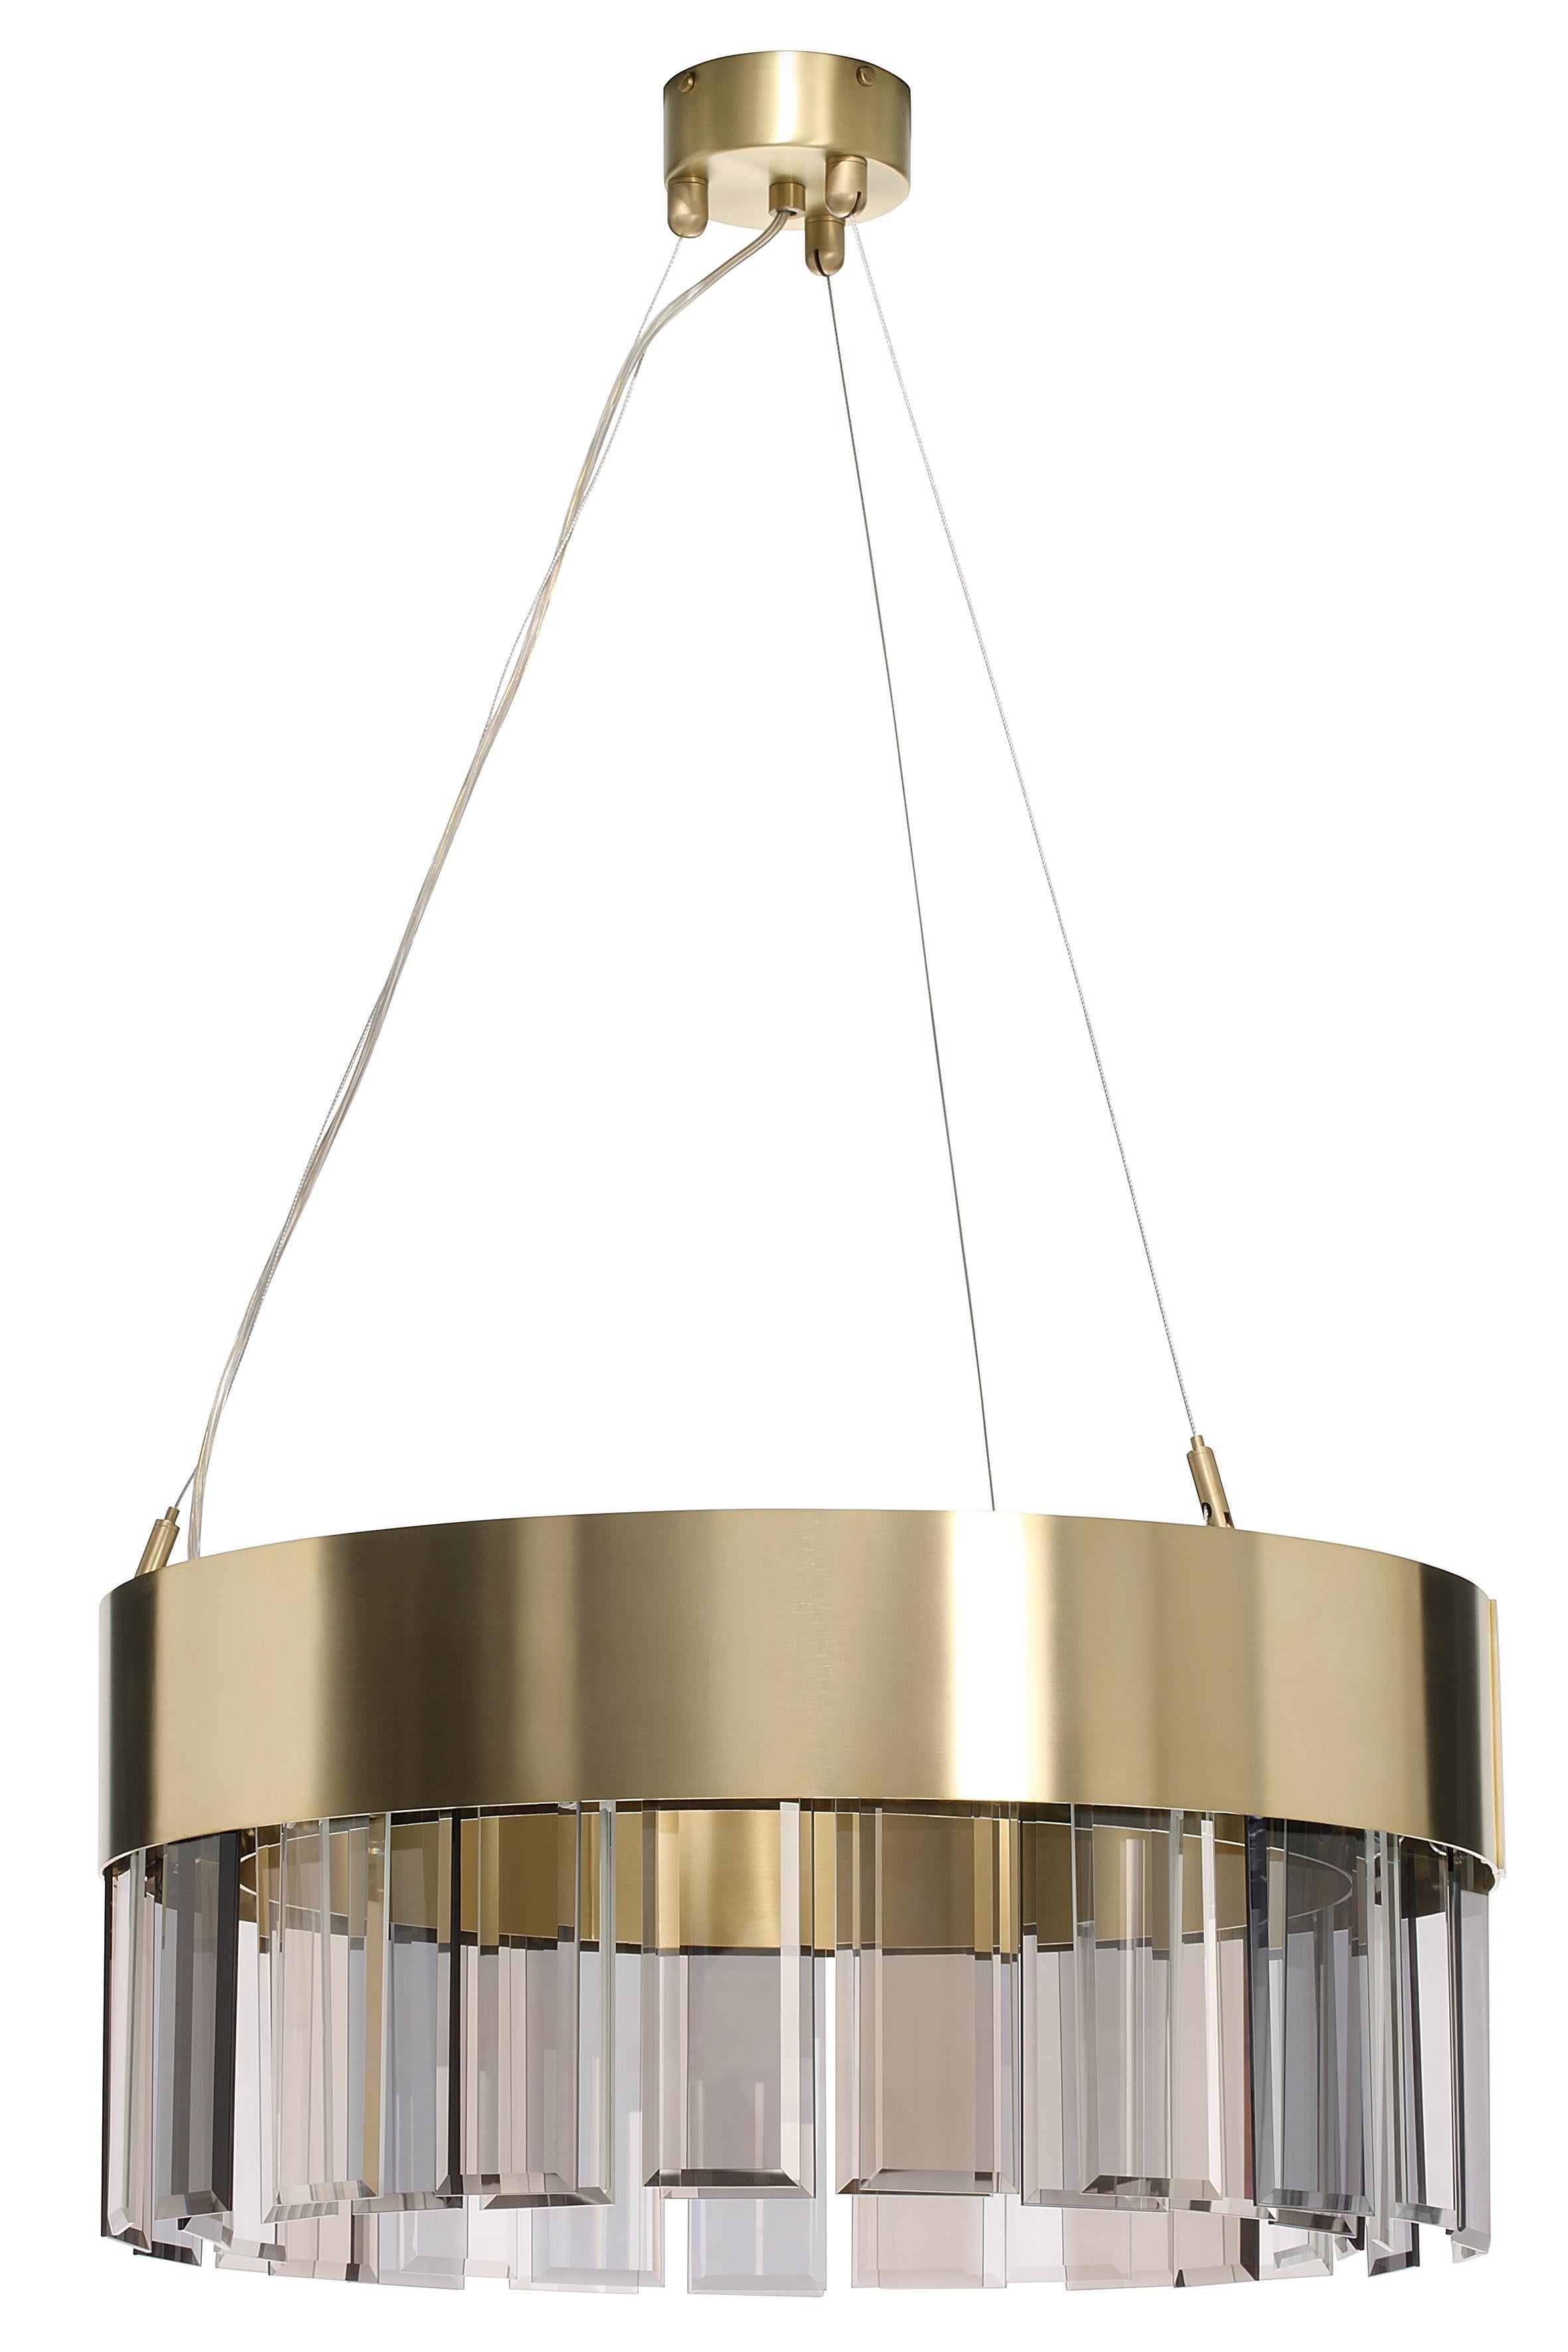 Solaris 500 pendant by CTO Lighting
Materials: satin brass with cut glass drops and stainless steel suspension wire/clear flex
Dimensions: H 25 x W 50 cm 

All our lamps can be wired according to each country. If sold to the USA it will be wired for